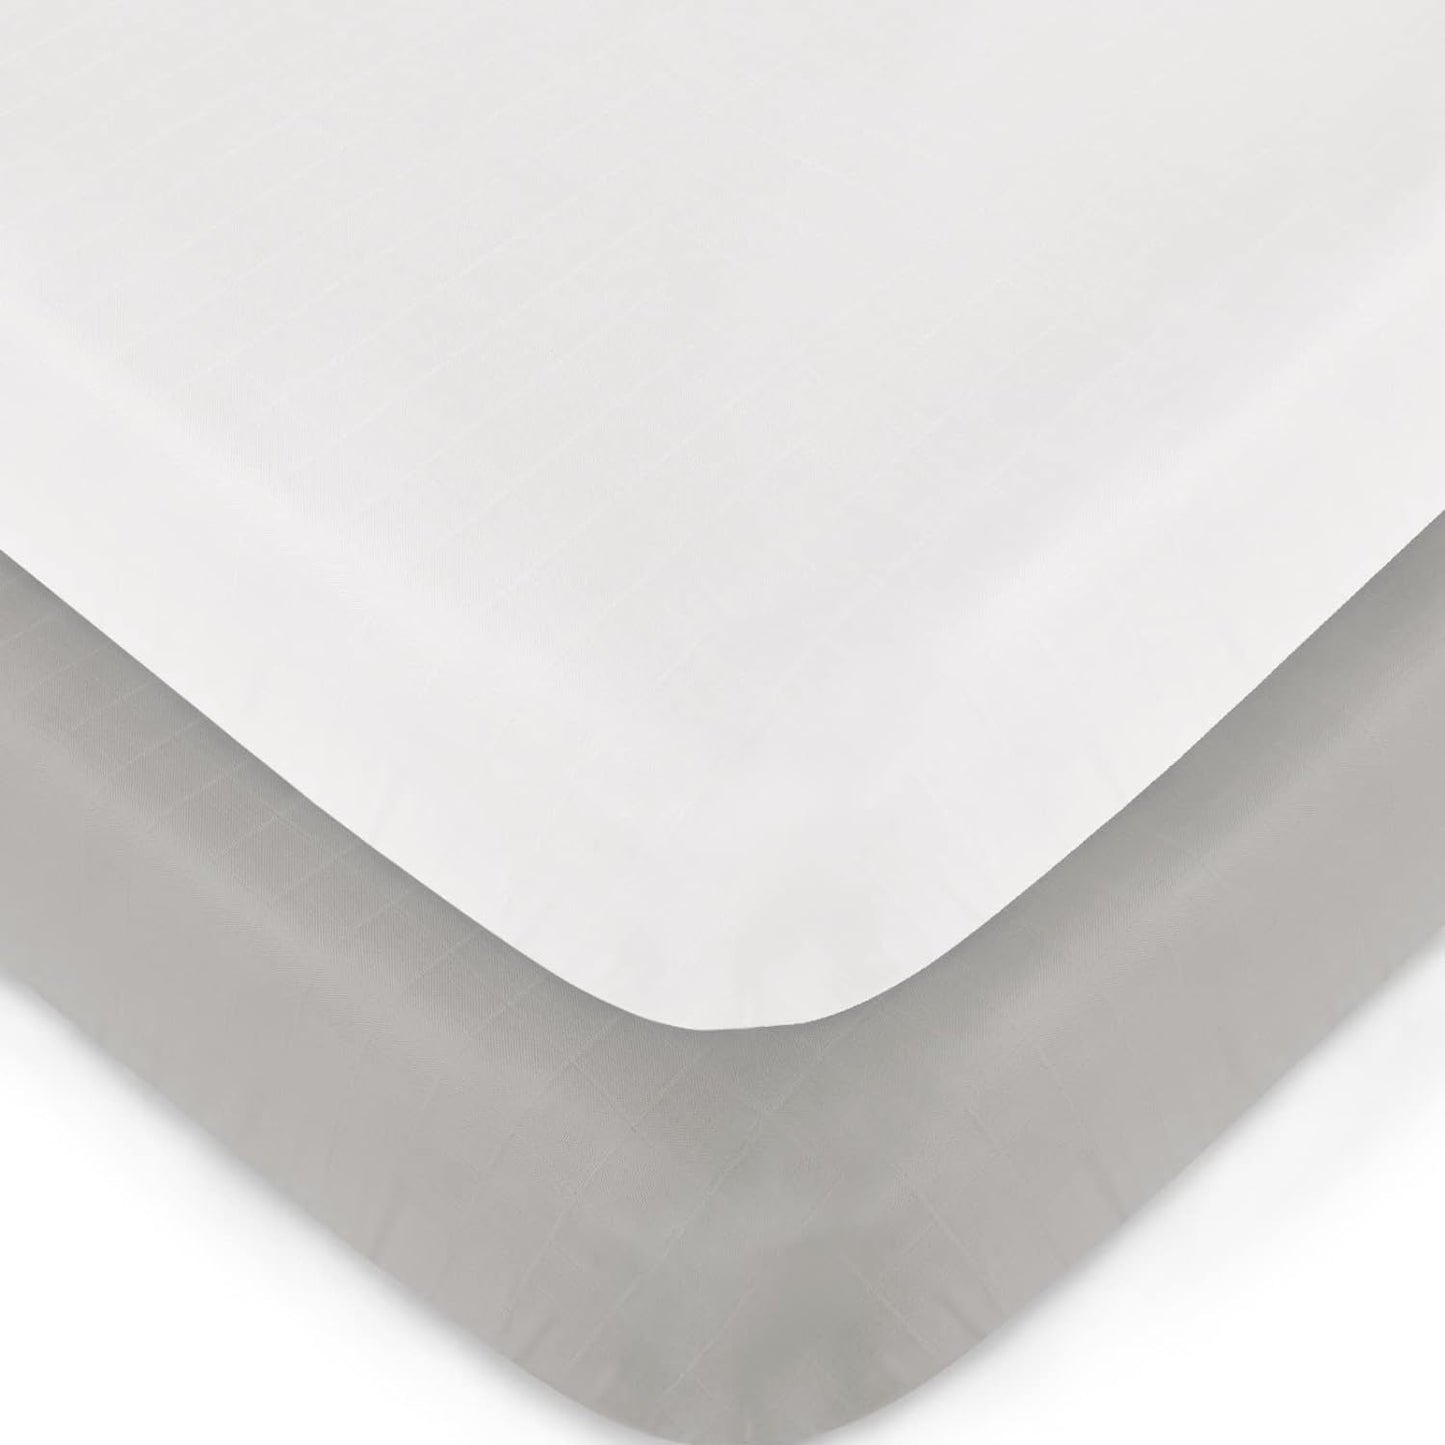 Muslin Crib Sheets - 2 Pack, Ultra Soft and Breathable (for Standard Crib/ Toddler Bed)